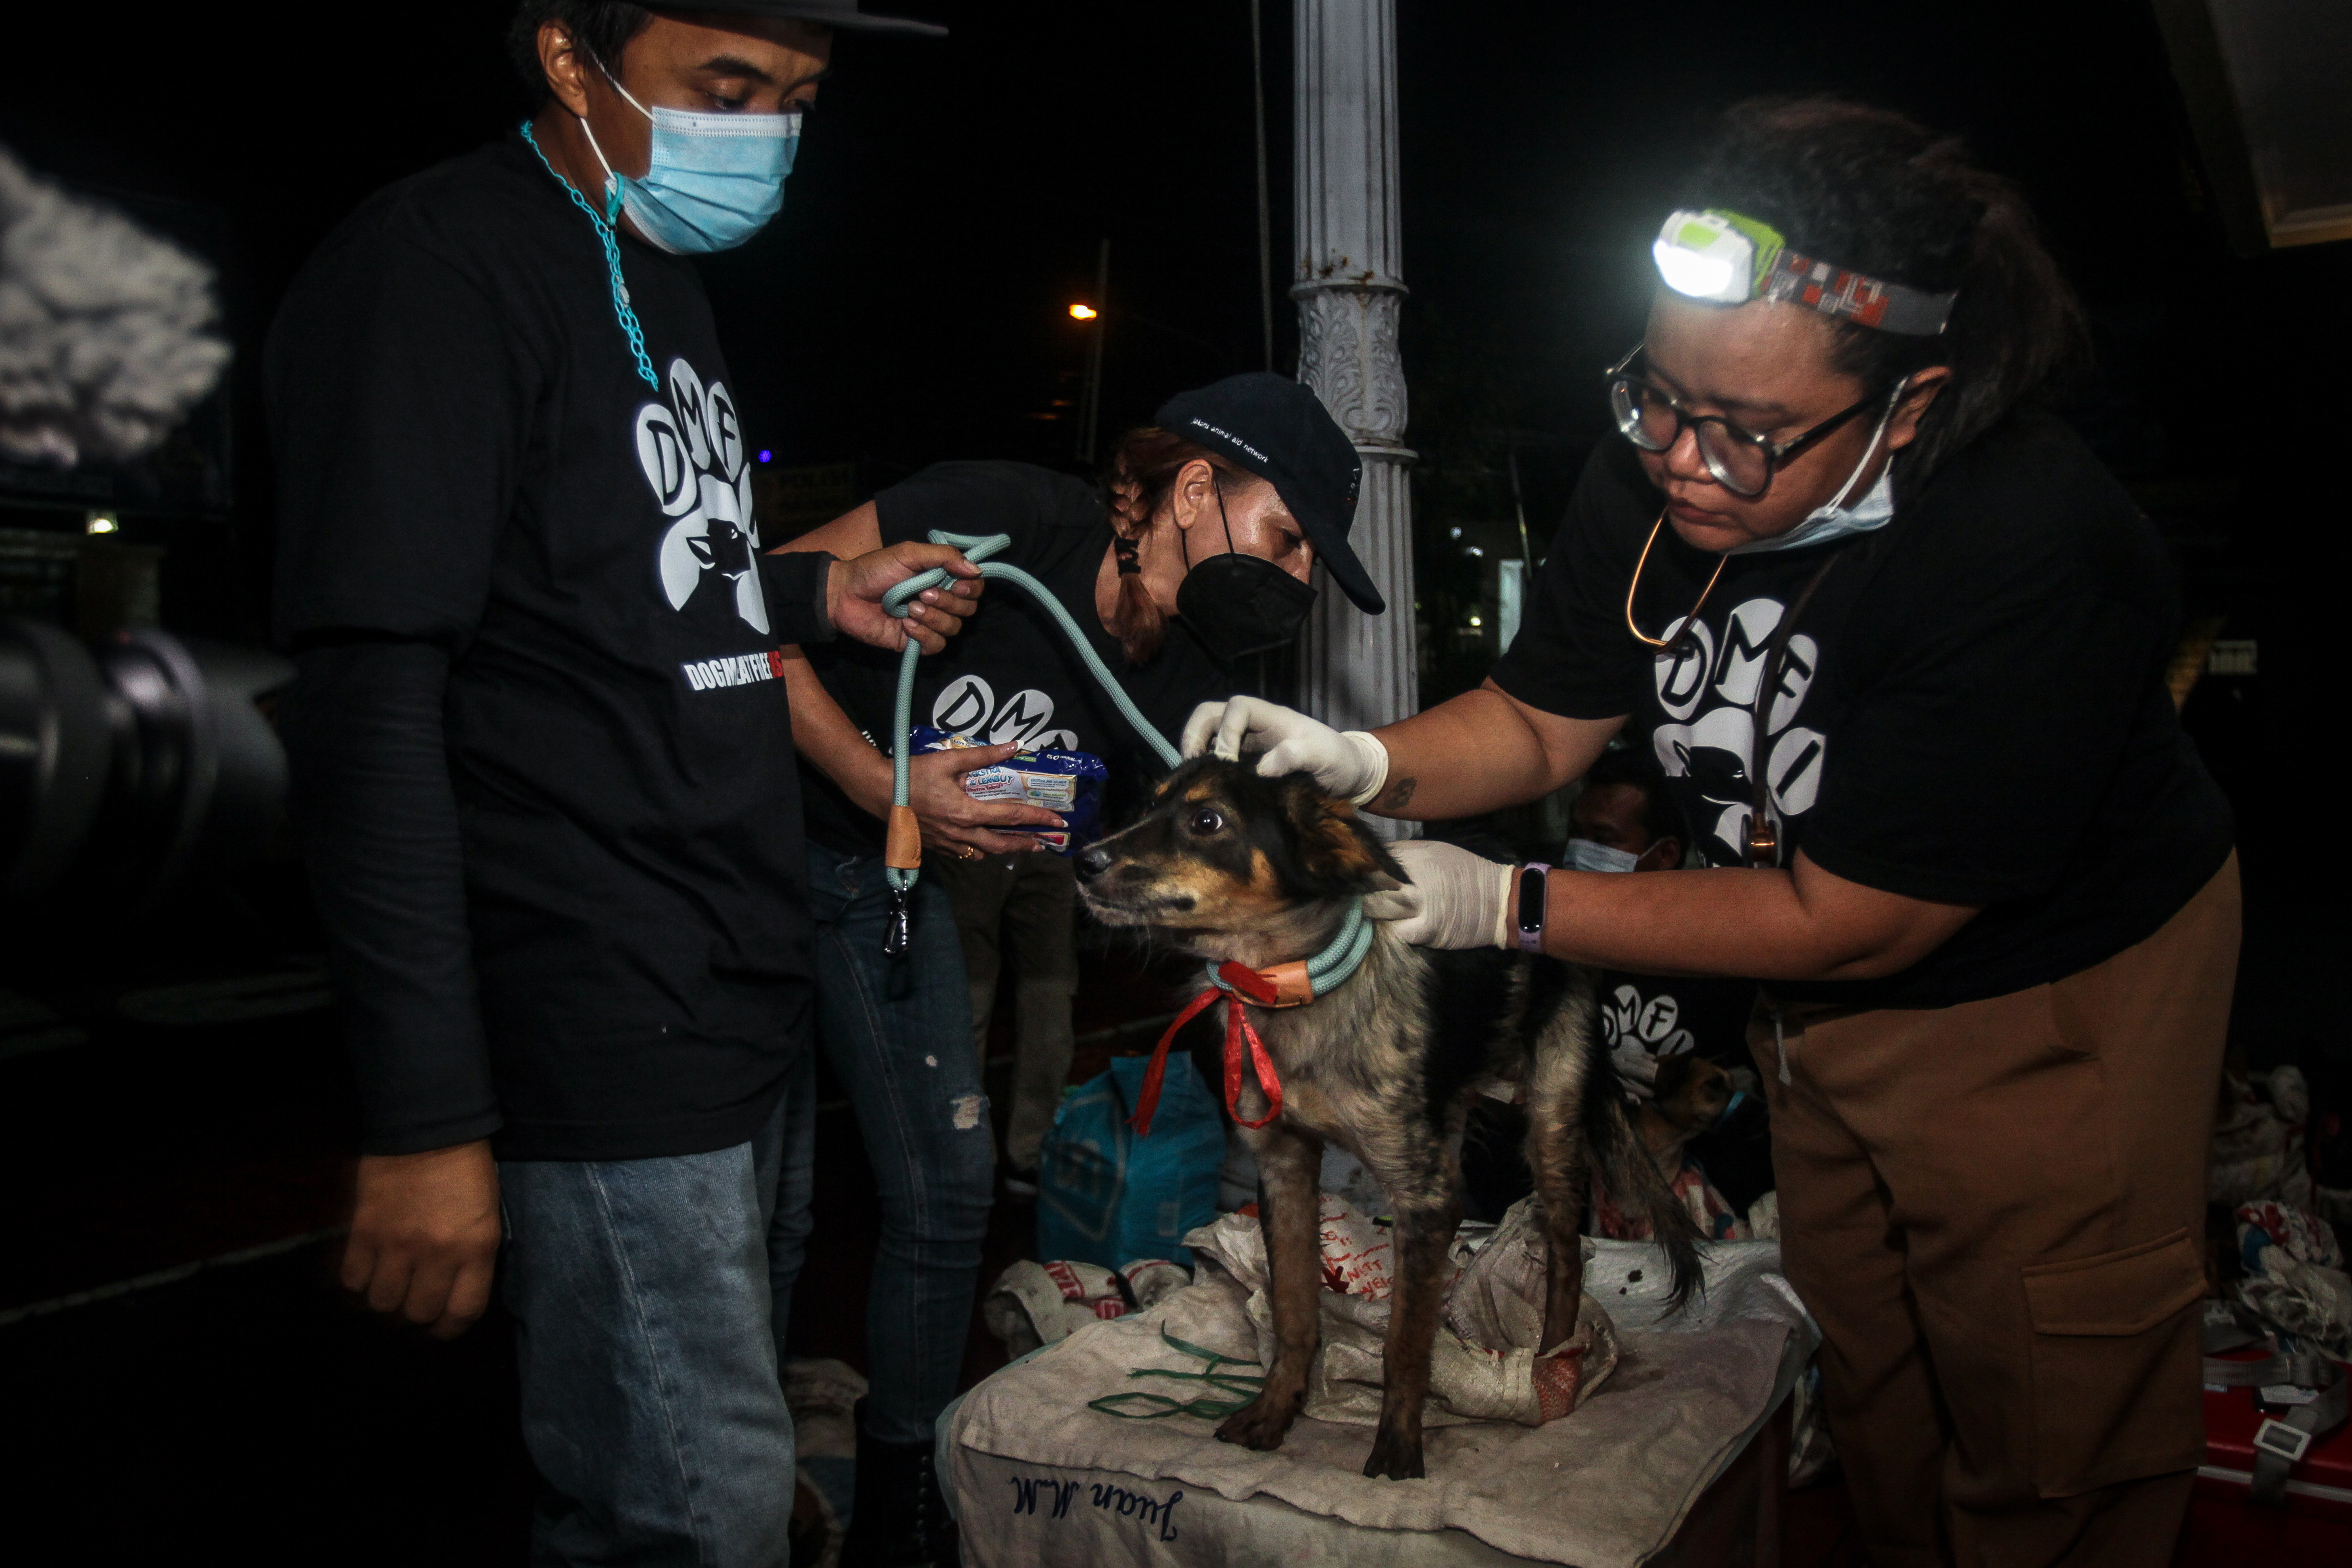 Dog Meat Free Indonesia members rescue dogs found in a police raid on local dog meat trade in Central Java.